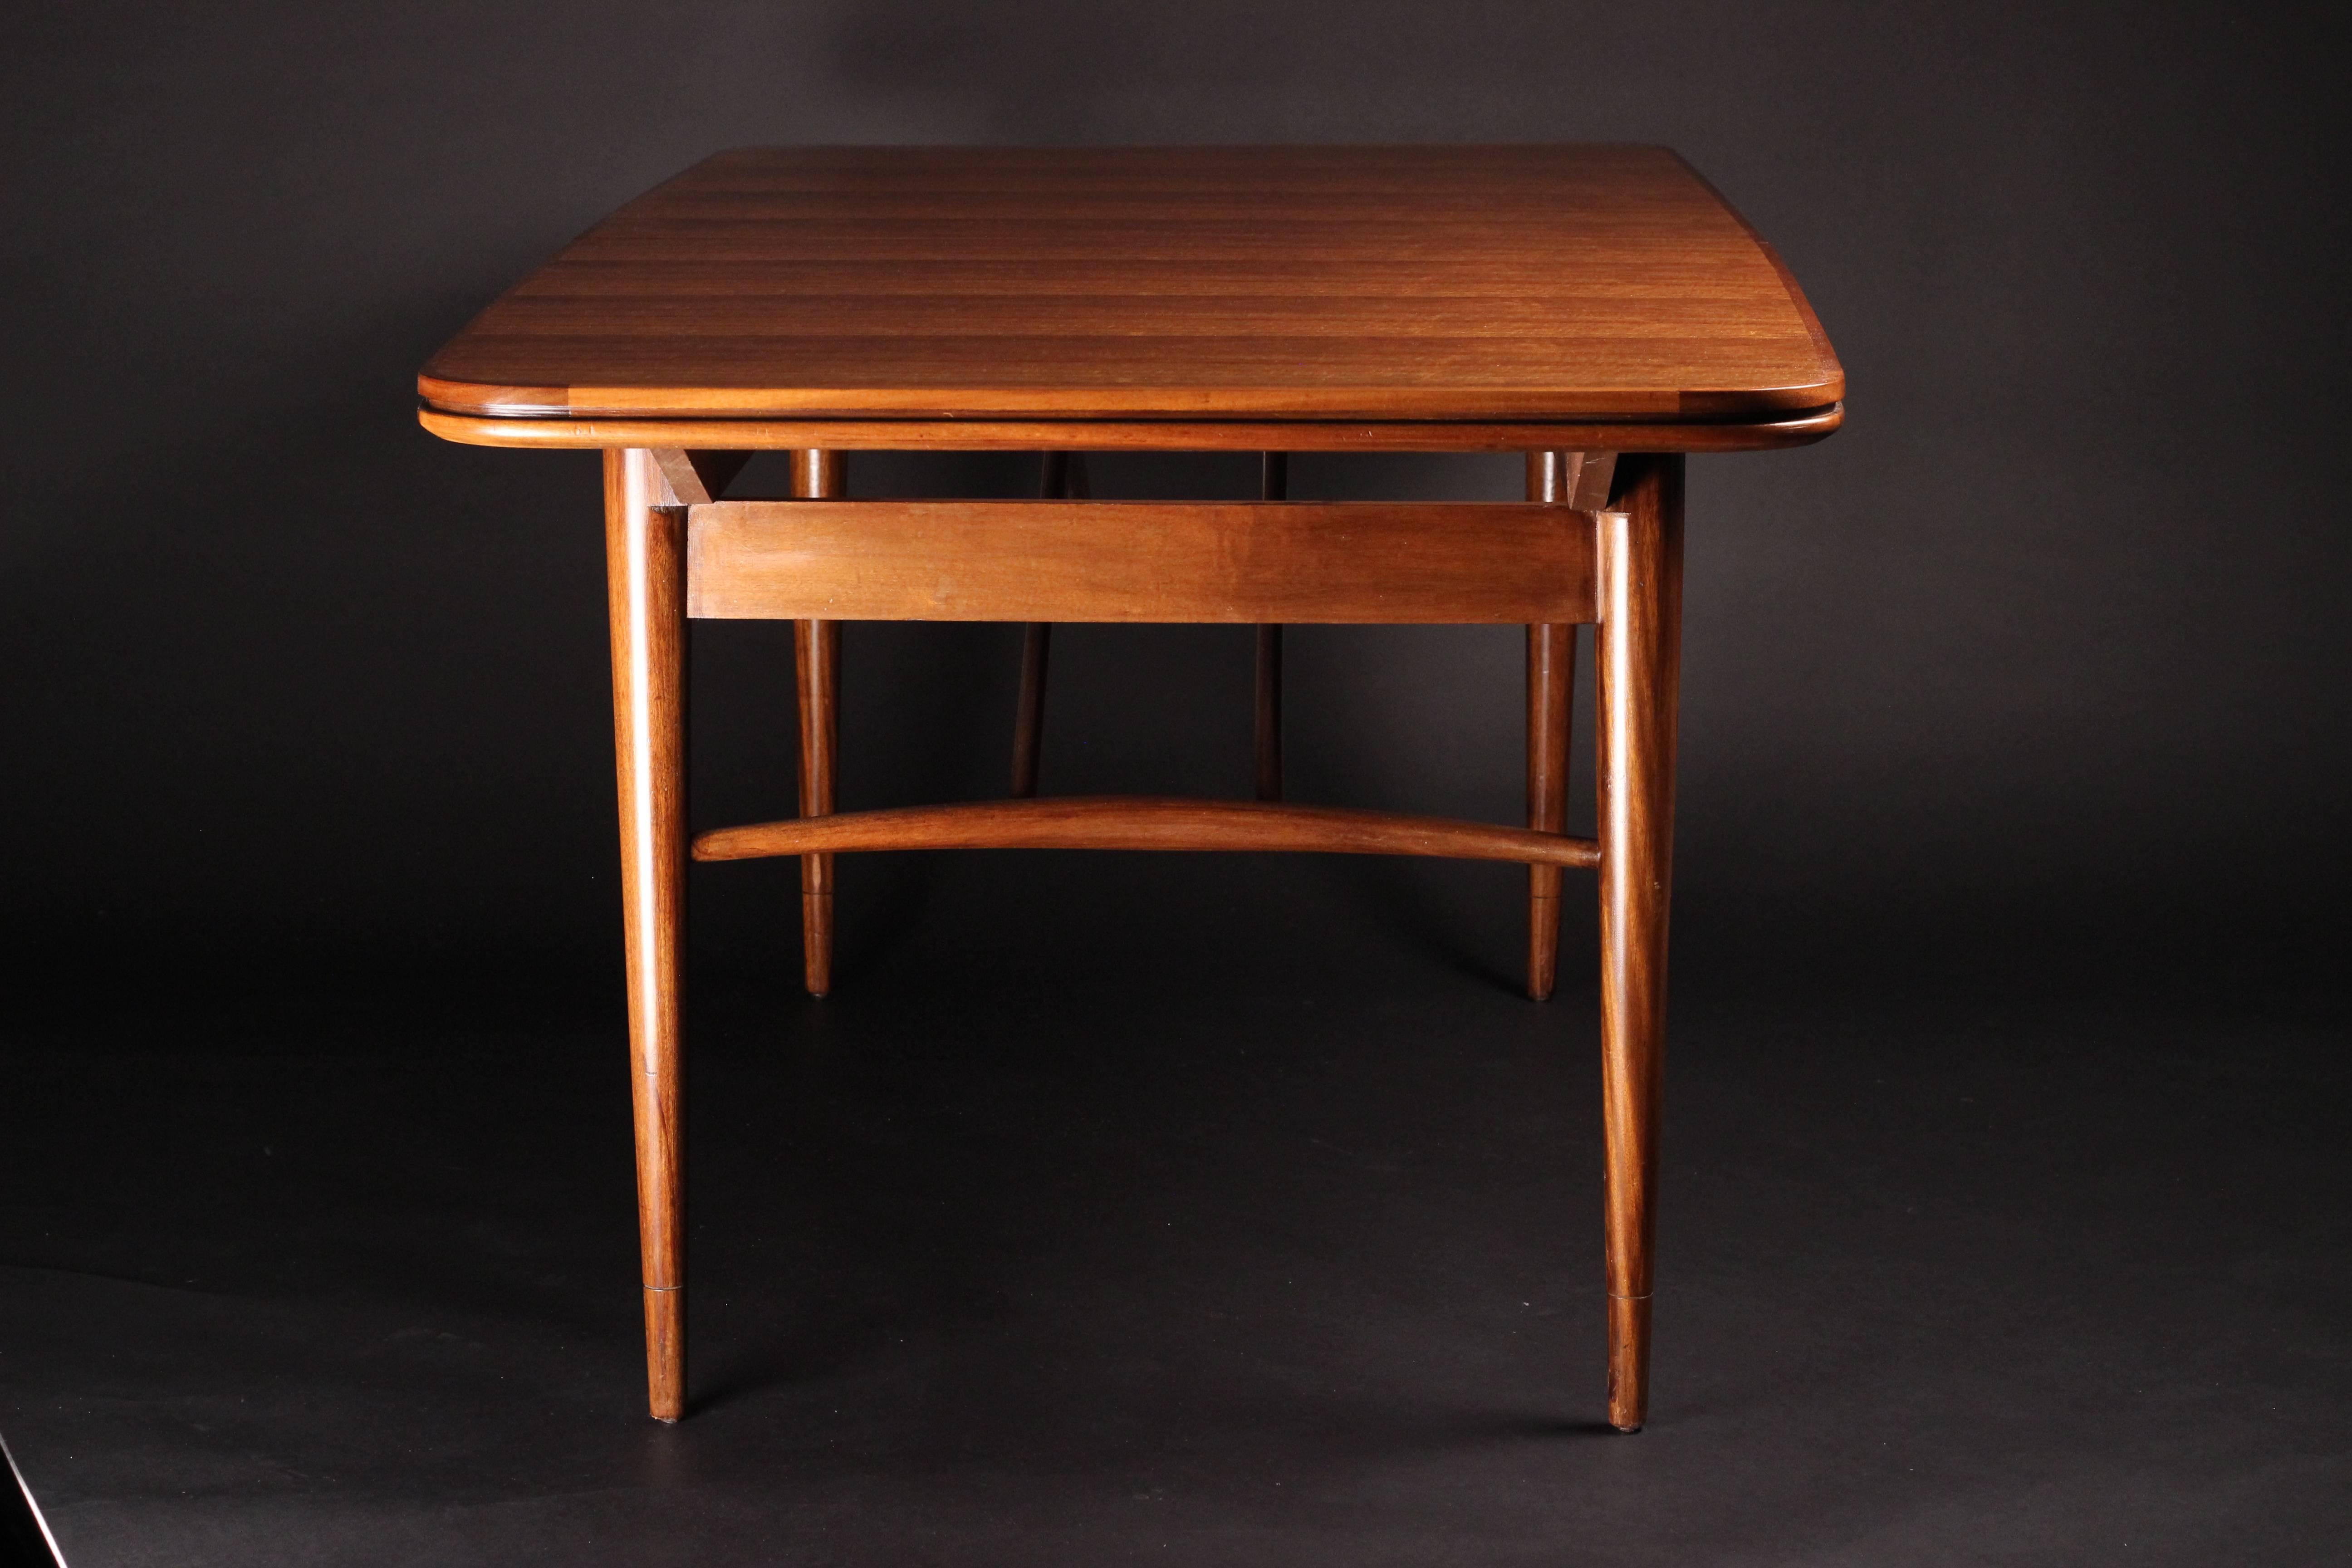 English Mid-Century Modern Dining Table by Robert Heritage for Archie Shine